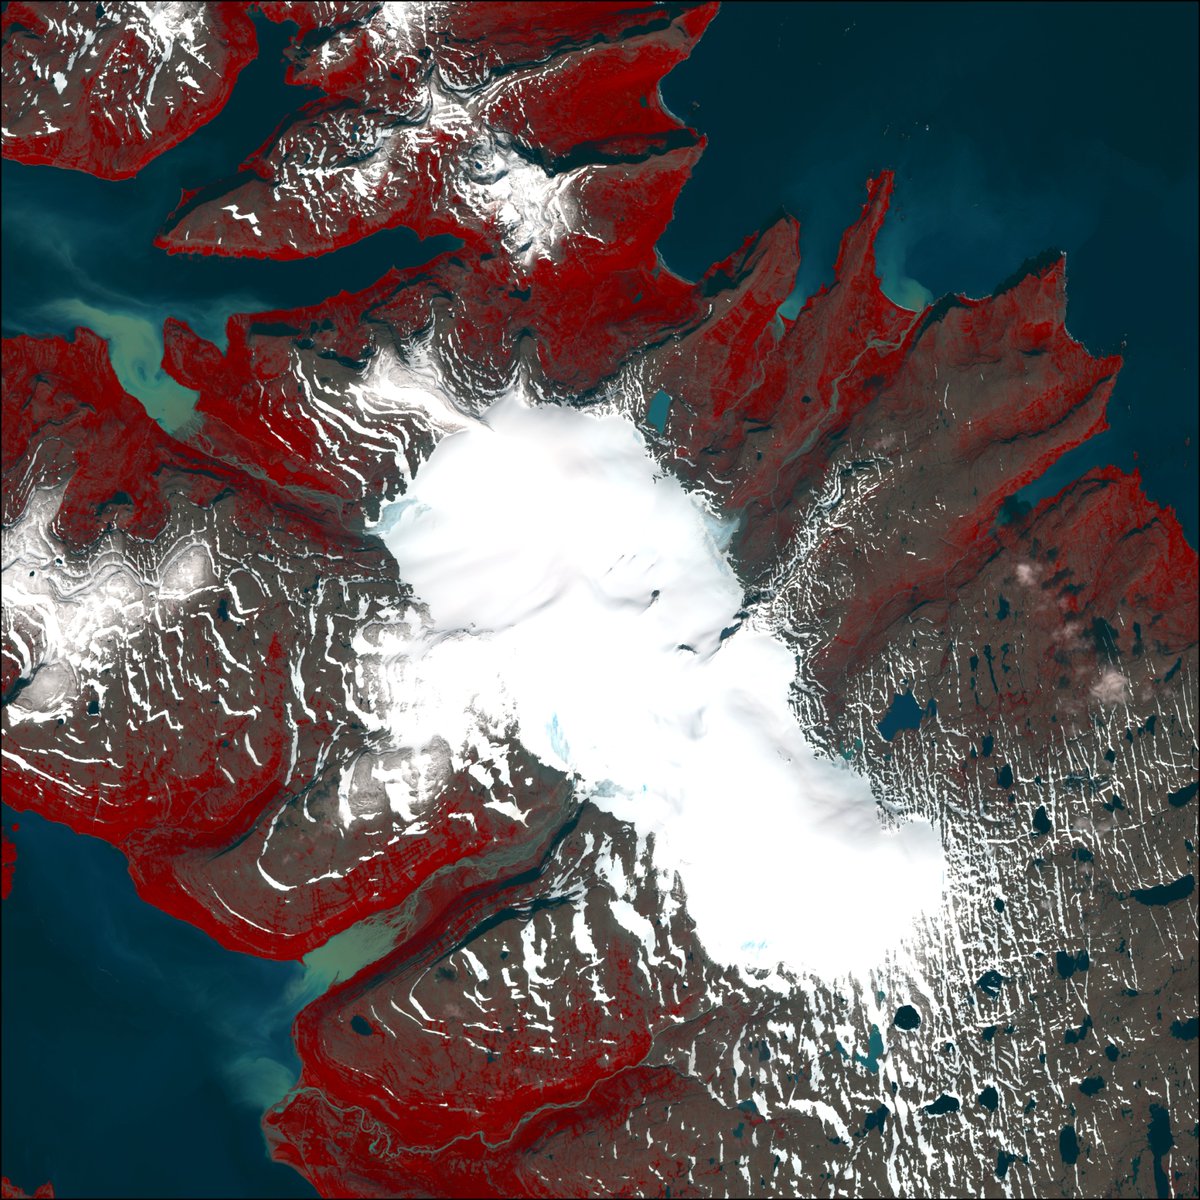 This will probably be a positive year for Drangajökull glacier, most of it still covered with winter snow after a cold June and July. False color near-infrared image acquired by #Landsat8 last Sunday evens show fresh snow around the margin